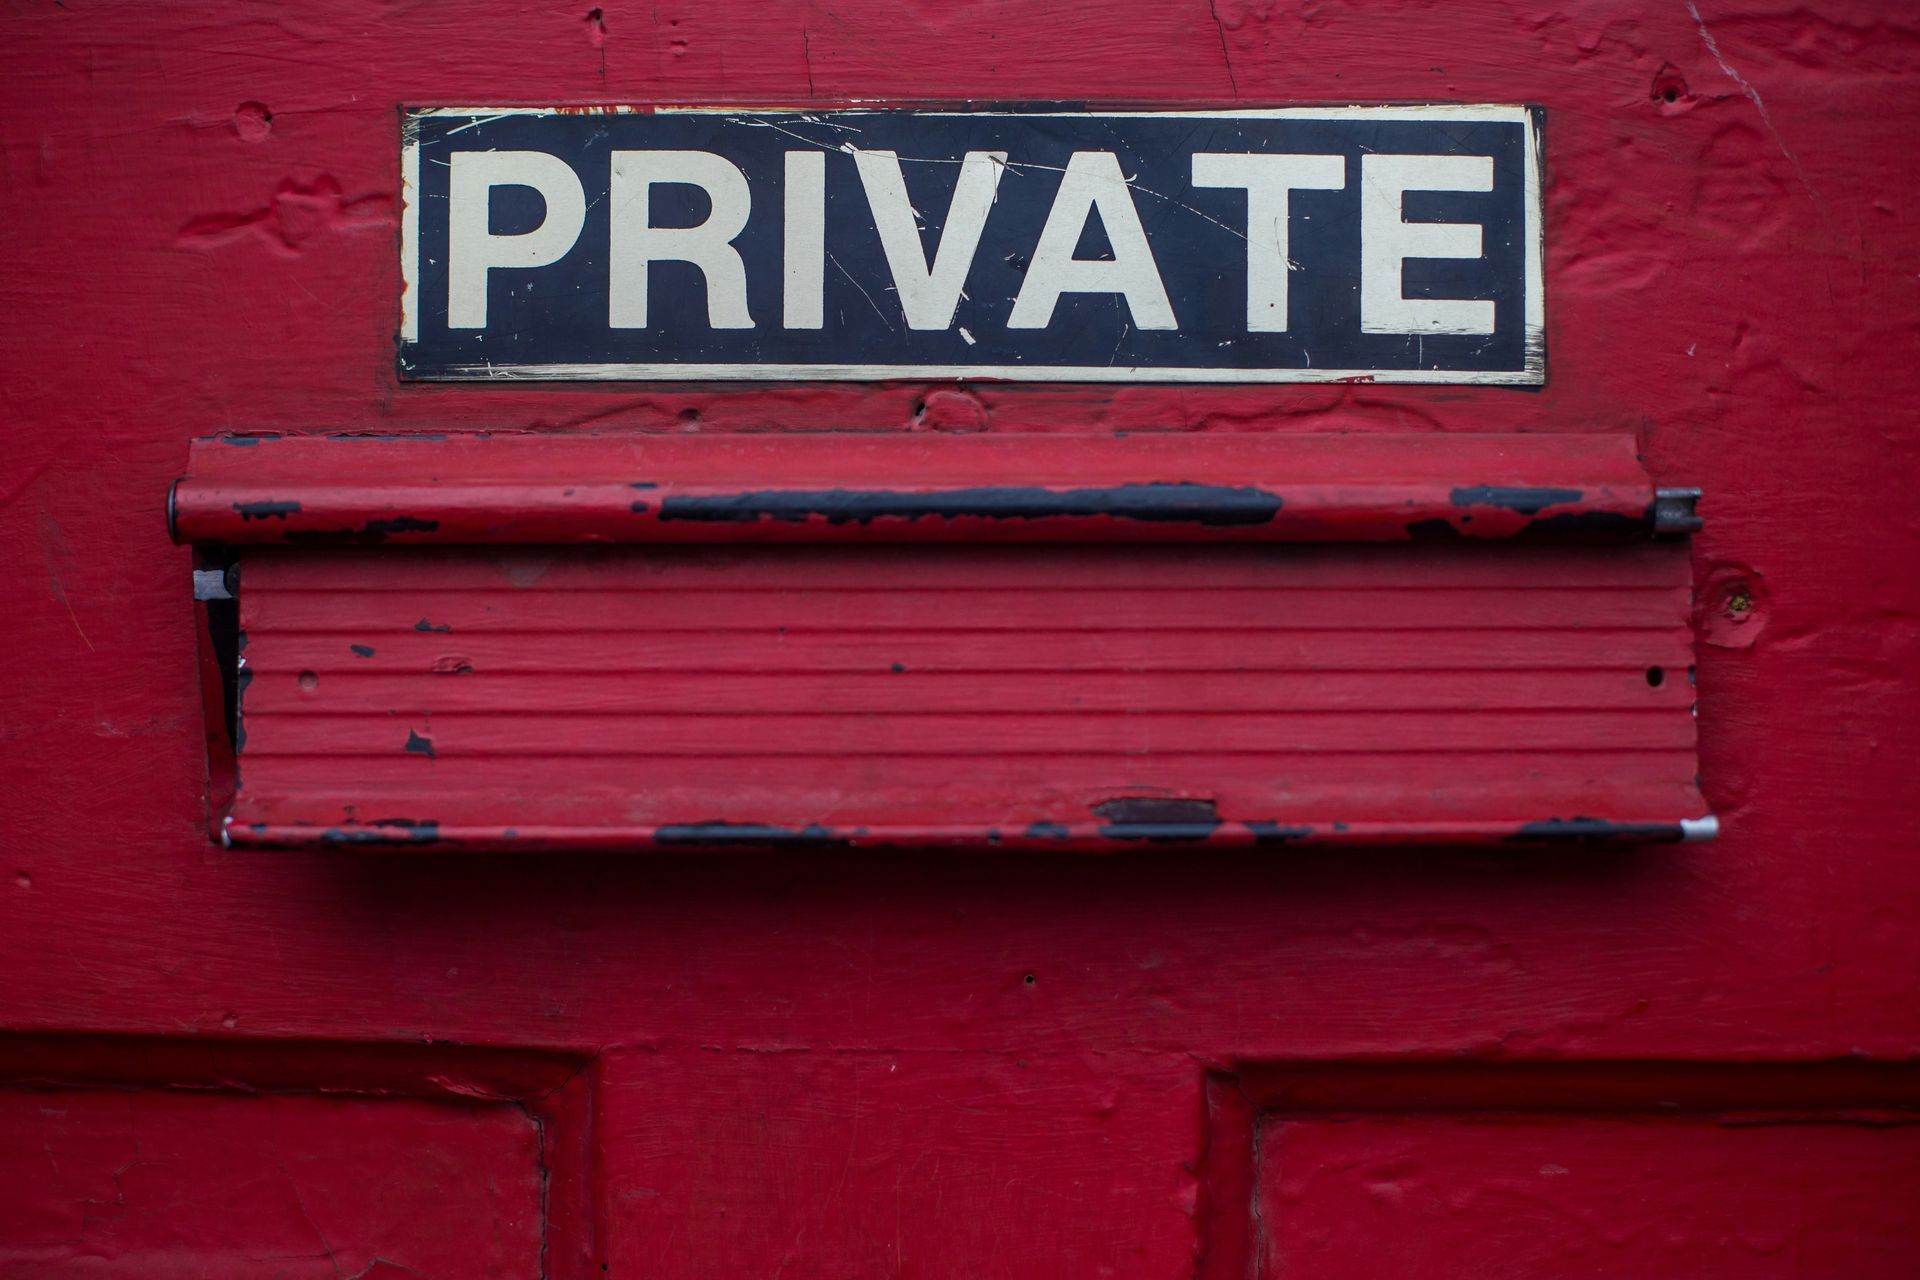 A red door with a private sign on it.